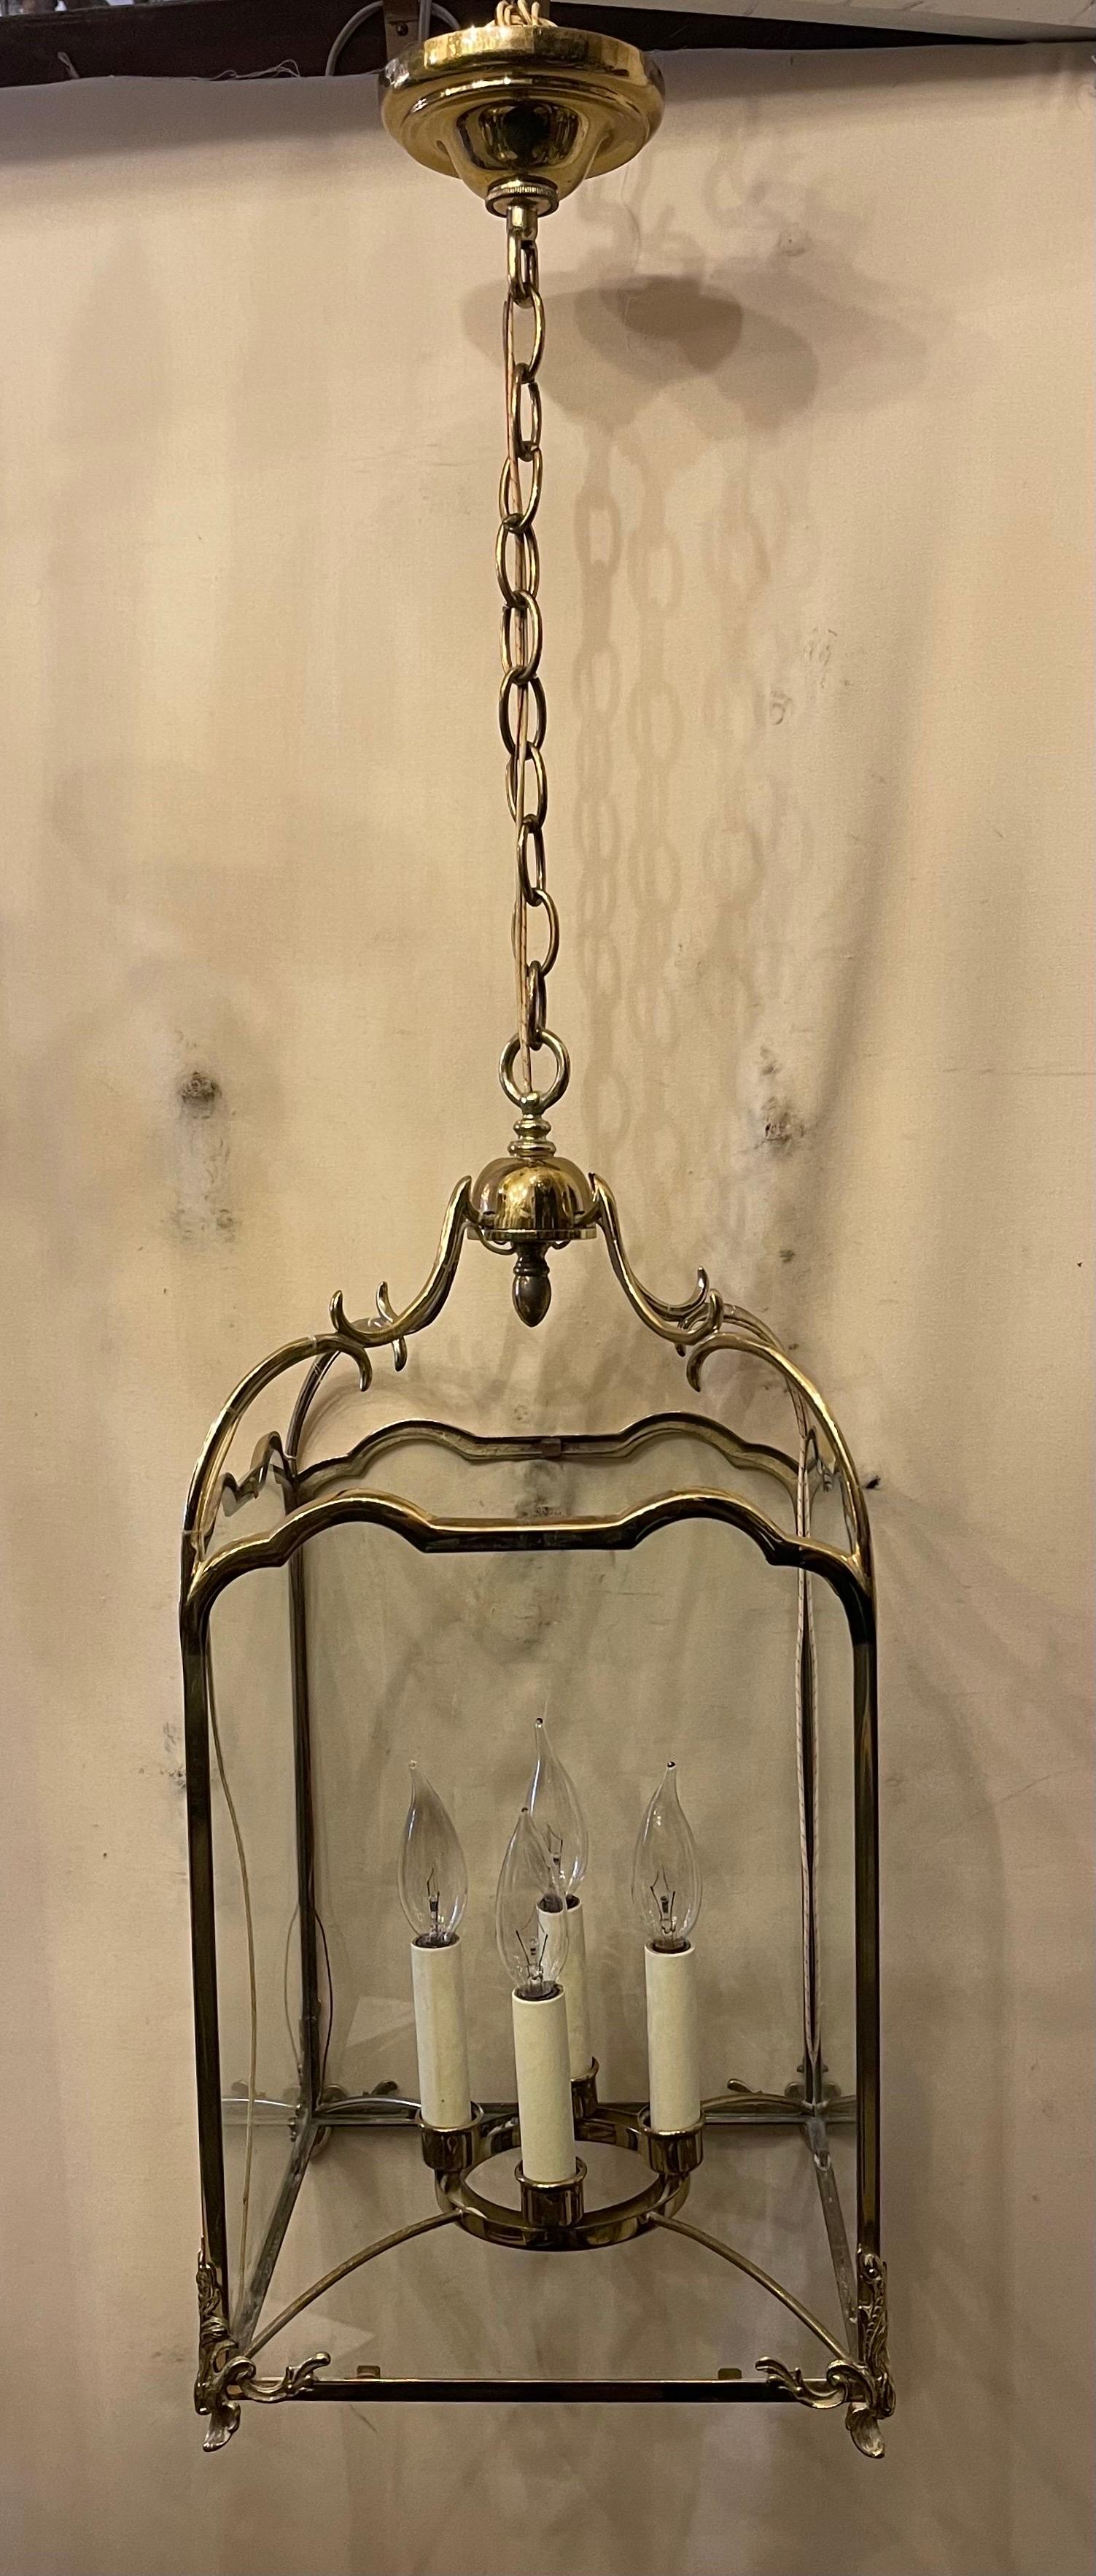 A wonderful vintage vaughan designs lighting lantern fixture in polished bronze / brass with glass panels, this square light fixture has a 4 candelabra light cluster inside and comes with chain, canopy and mounting hardware.